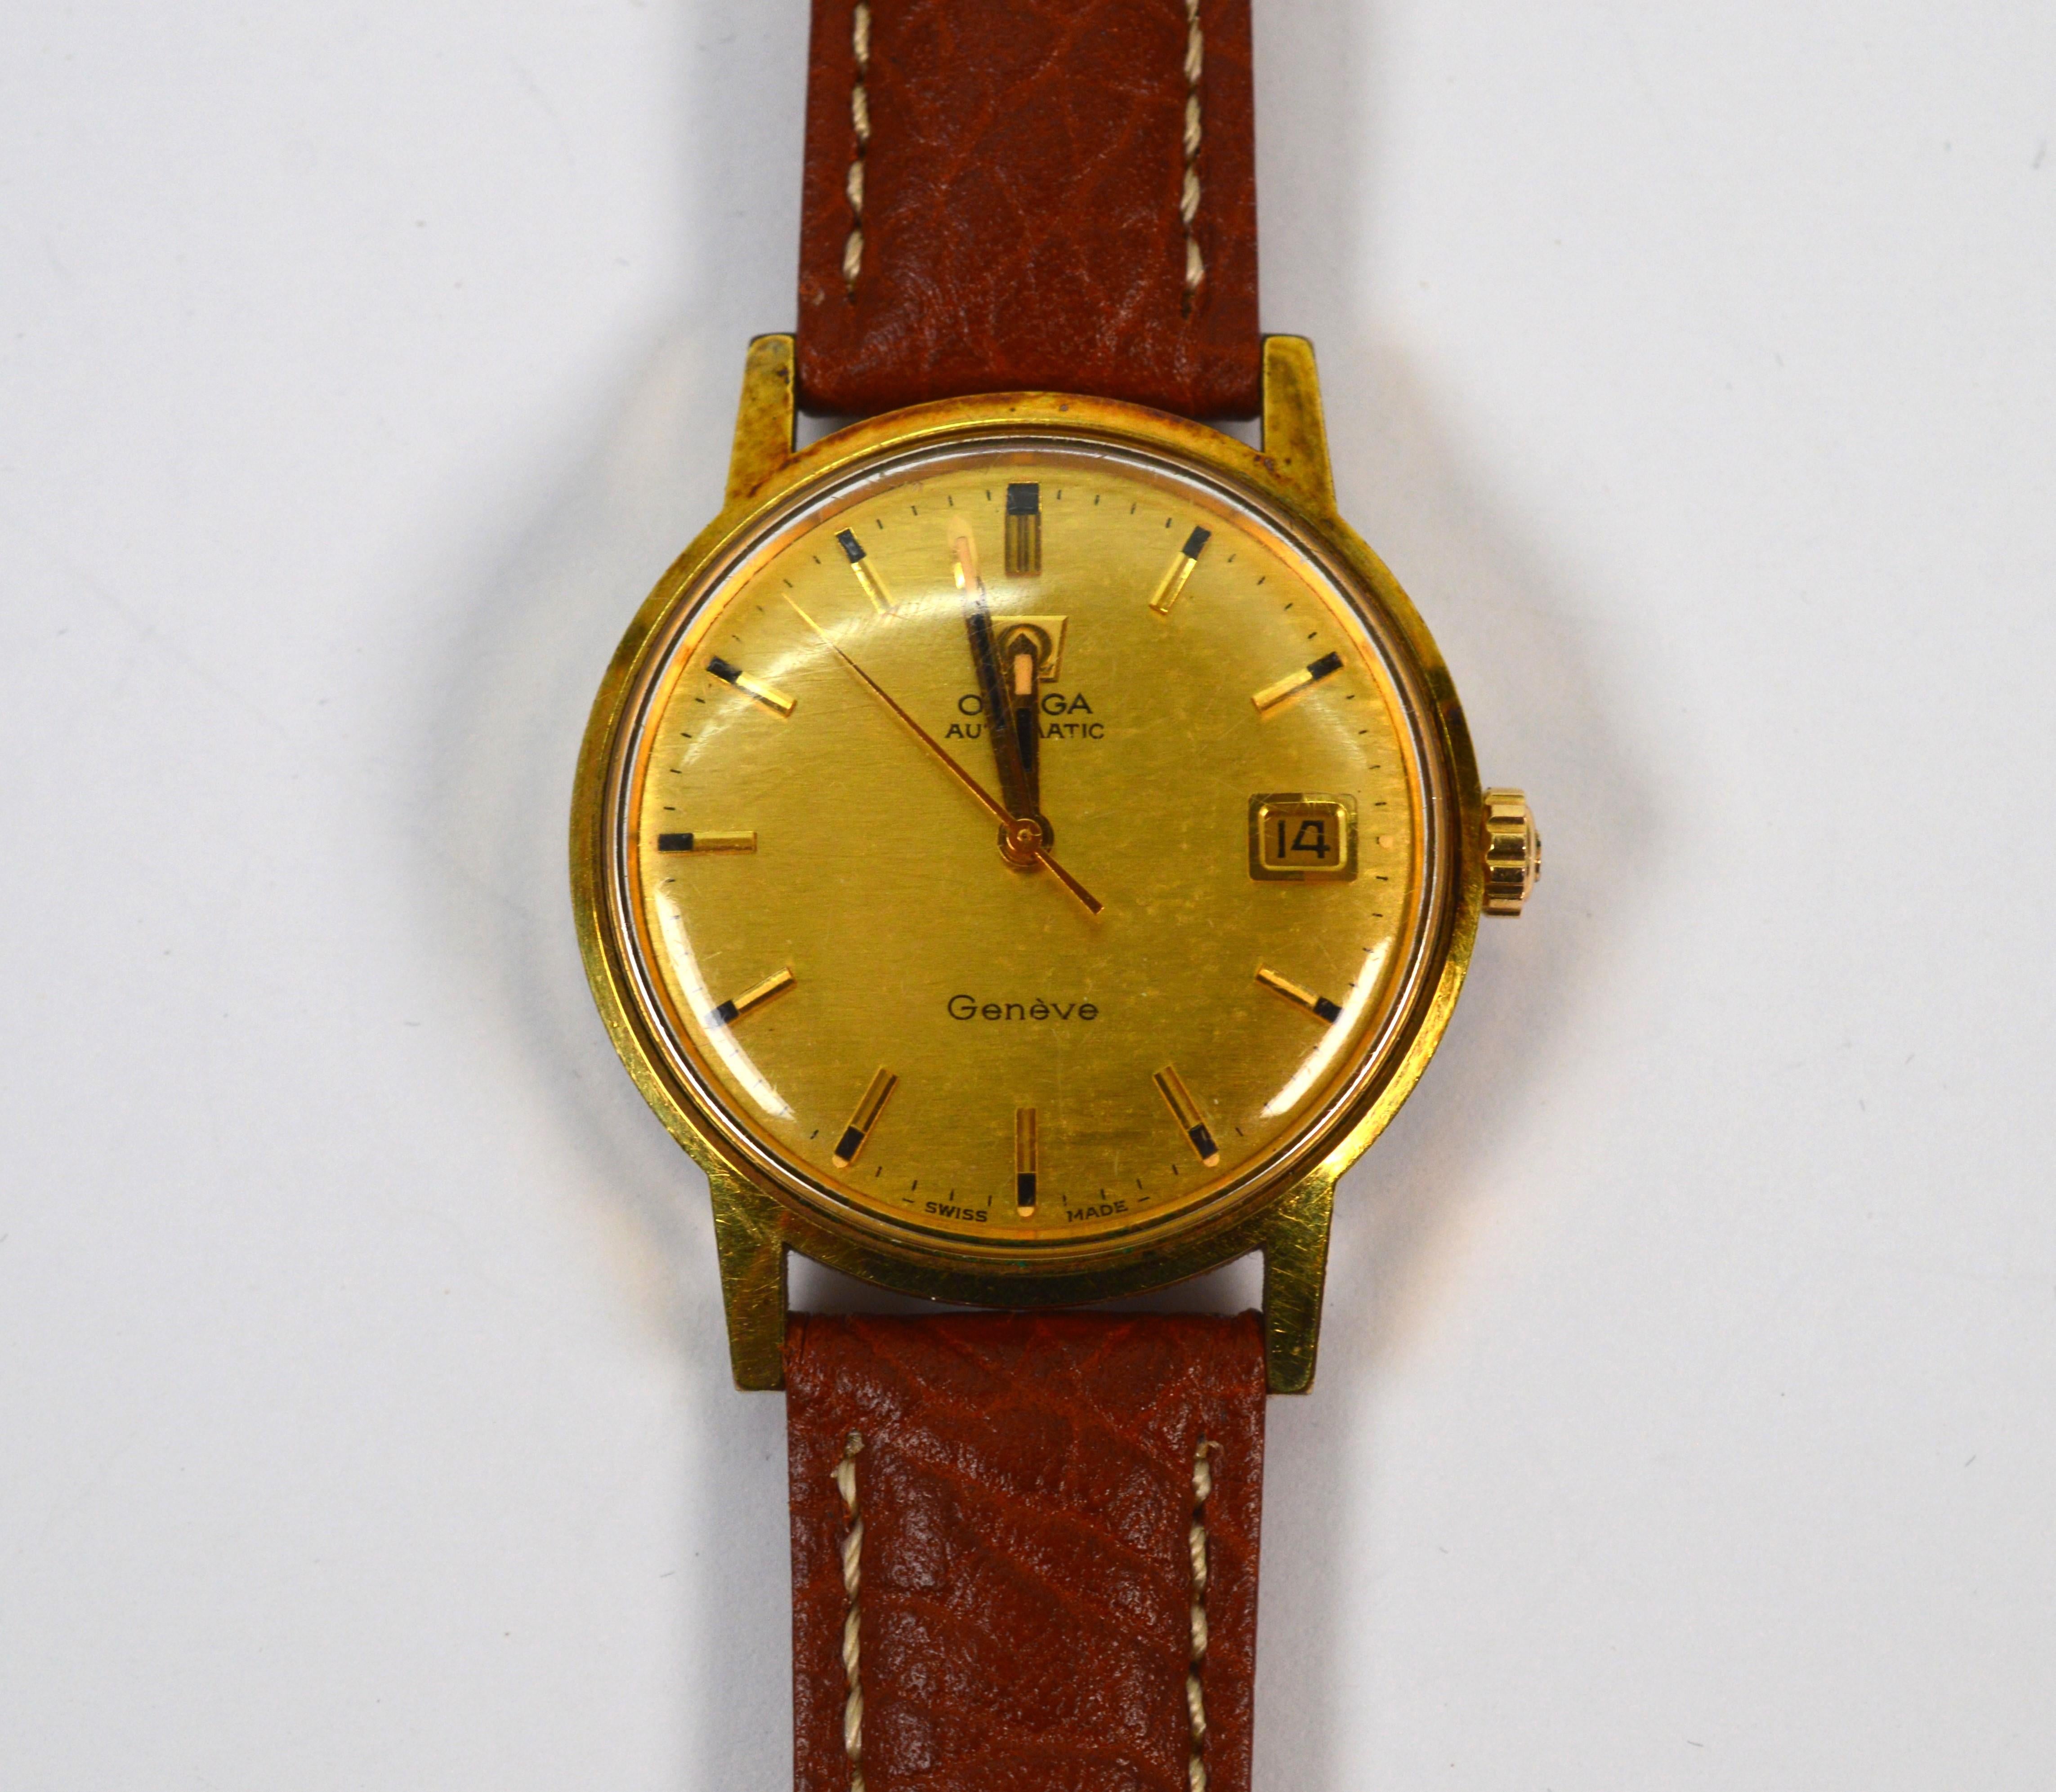 Smart looking with casual flair, this vintage Omega 565 Men's Automatic Wrist Watch with Date has a 245 quick set 17 jewel automatic movement. Circa 1960's, in size 33mm, this fine vintage Omega has a gold-toned face with matchstick numerals.  A